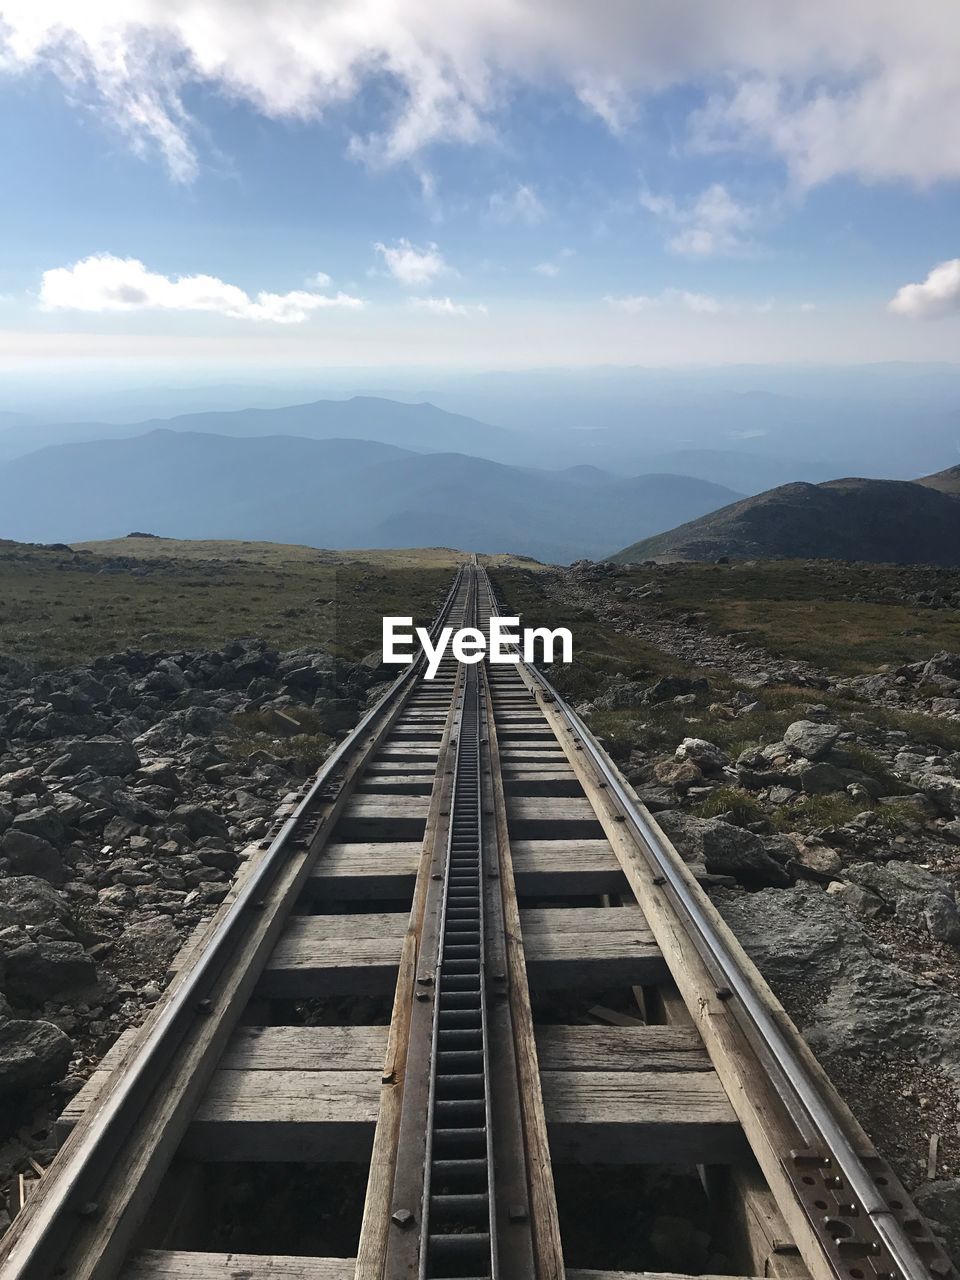 Train tracks in the white mountains of new hampshire